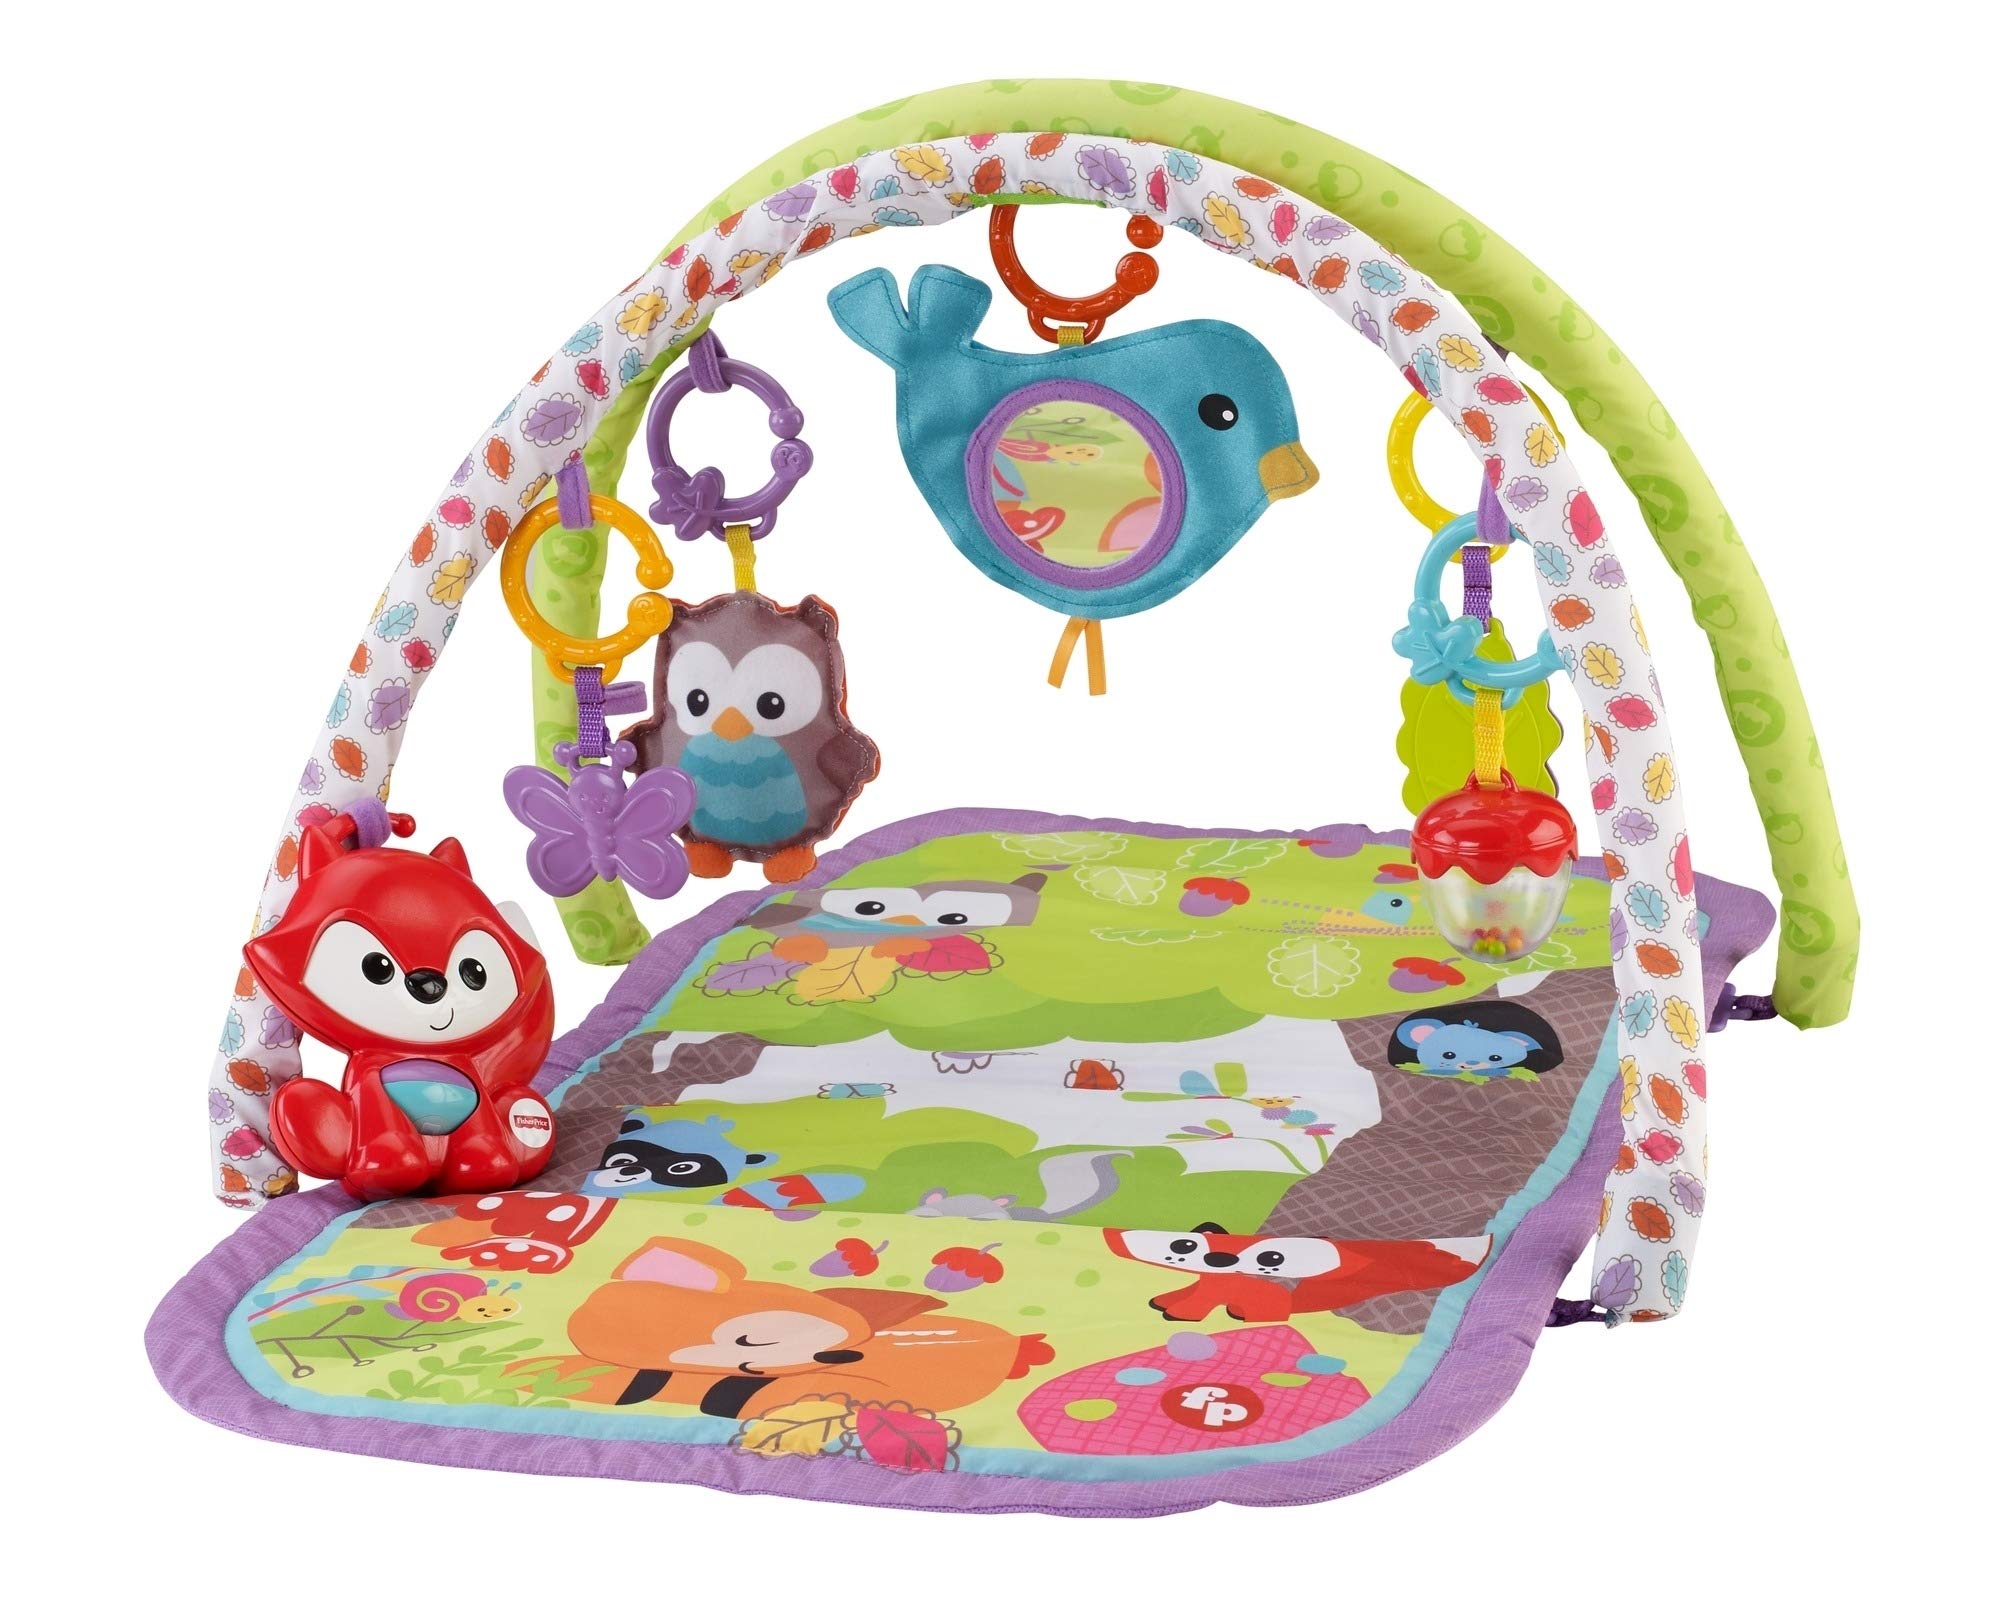 Fisher-Price 3-in-1 Musical Activity Gym, Woodland